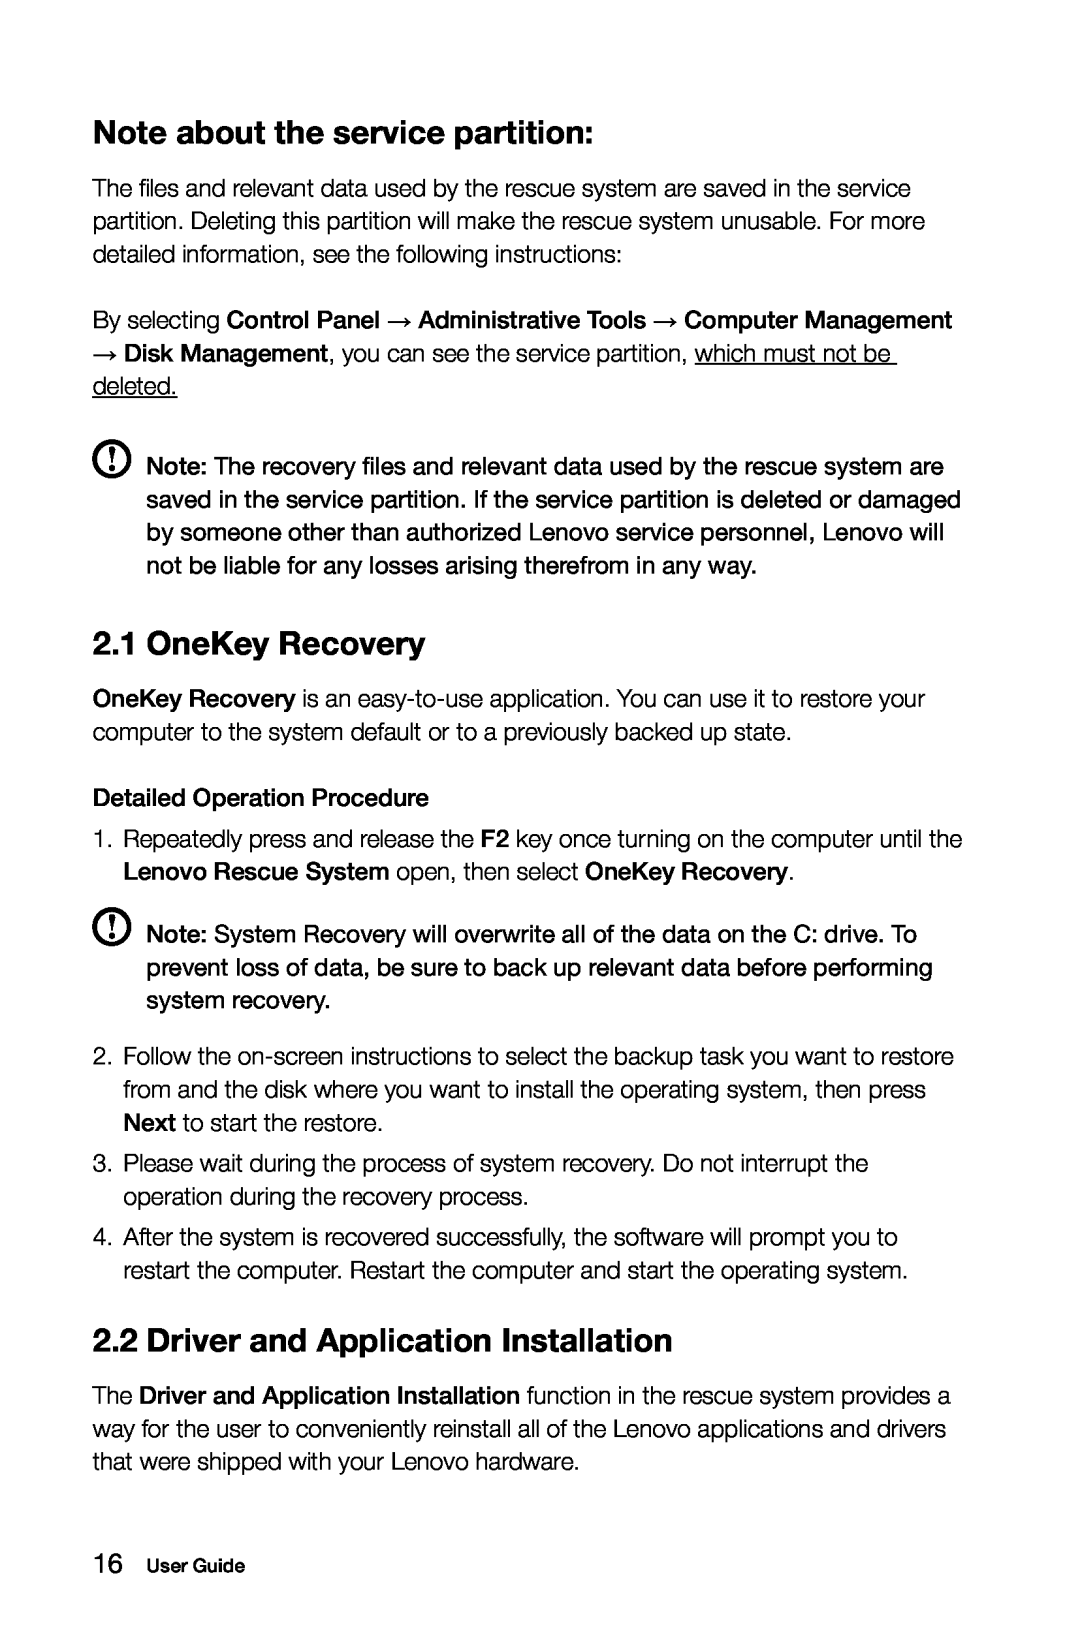 Lenovo 10080/3099/1194 manual Note about the service partition, OneKey Recovery, Driver and Application Installation 